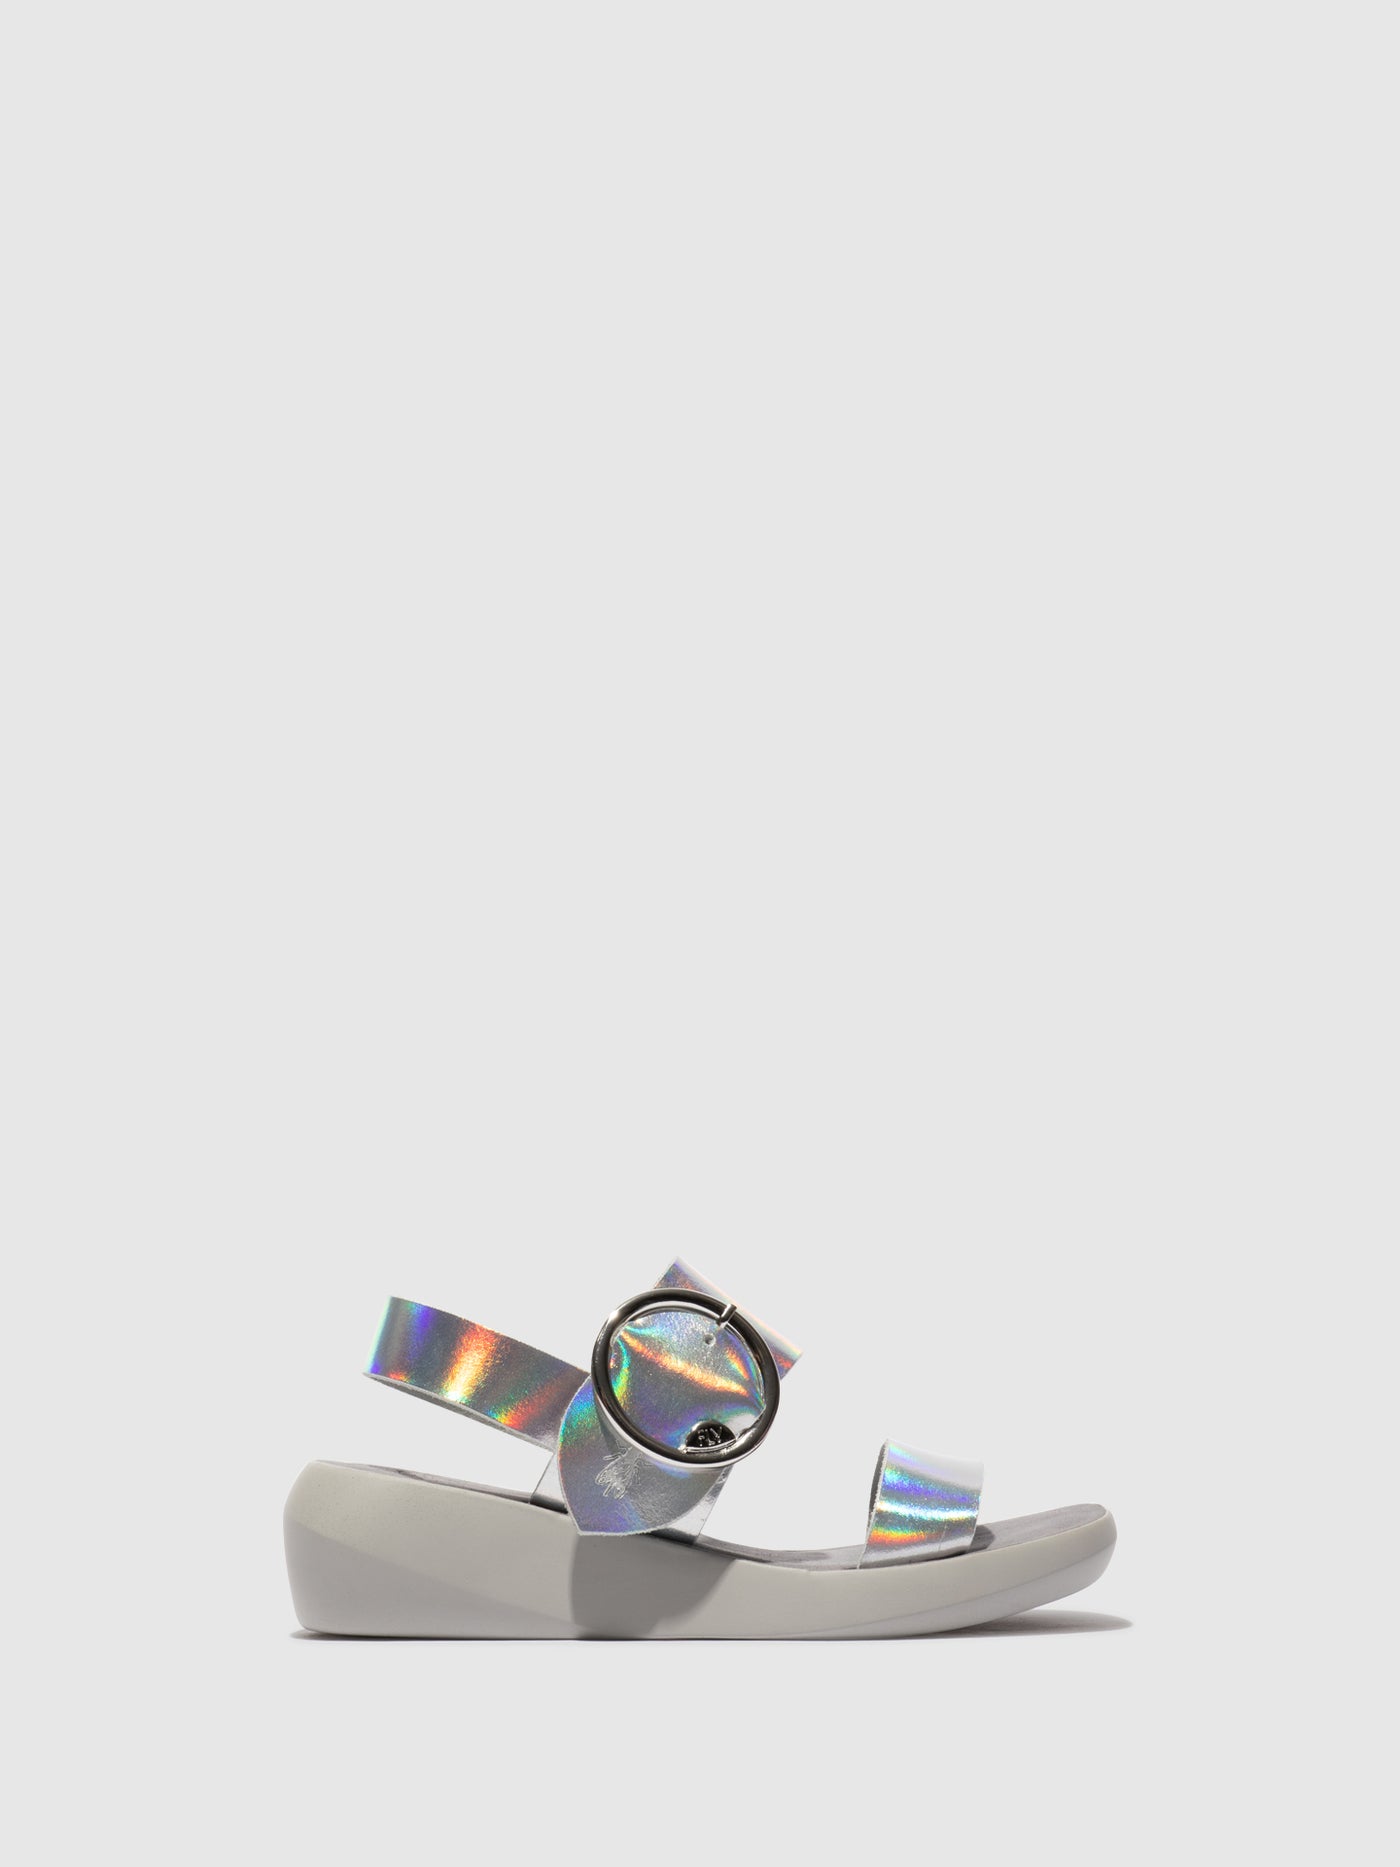 Buckle Sandals BANI739FLY SILVER